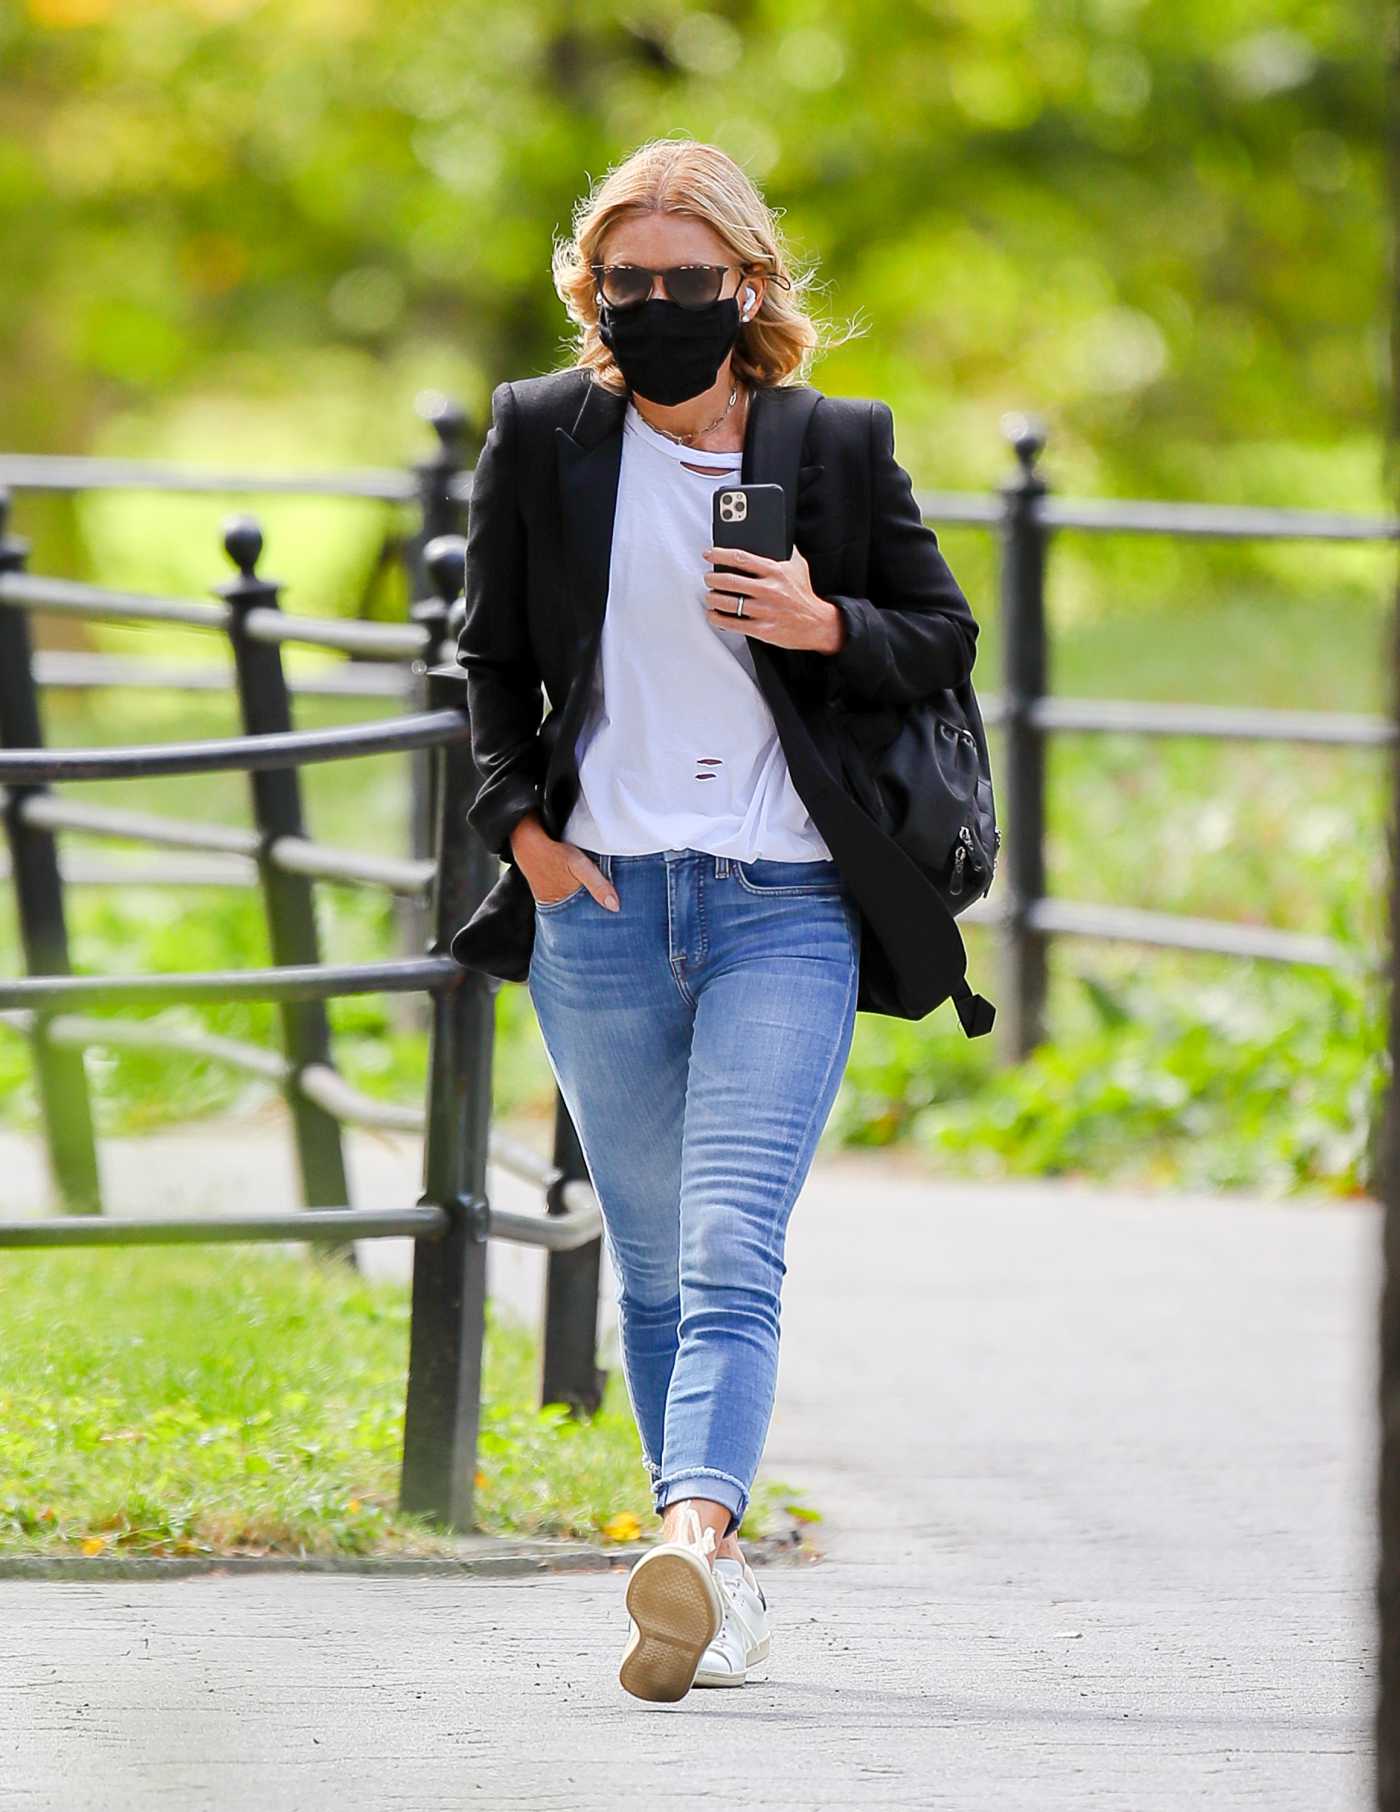 Kelly Ripa in a Black Blazer Was Seen in Central Park in New York 10/11/2020